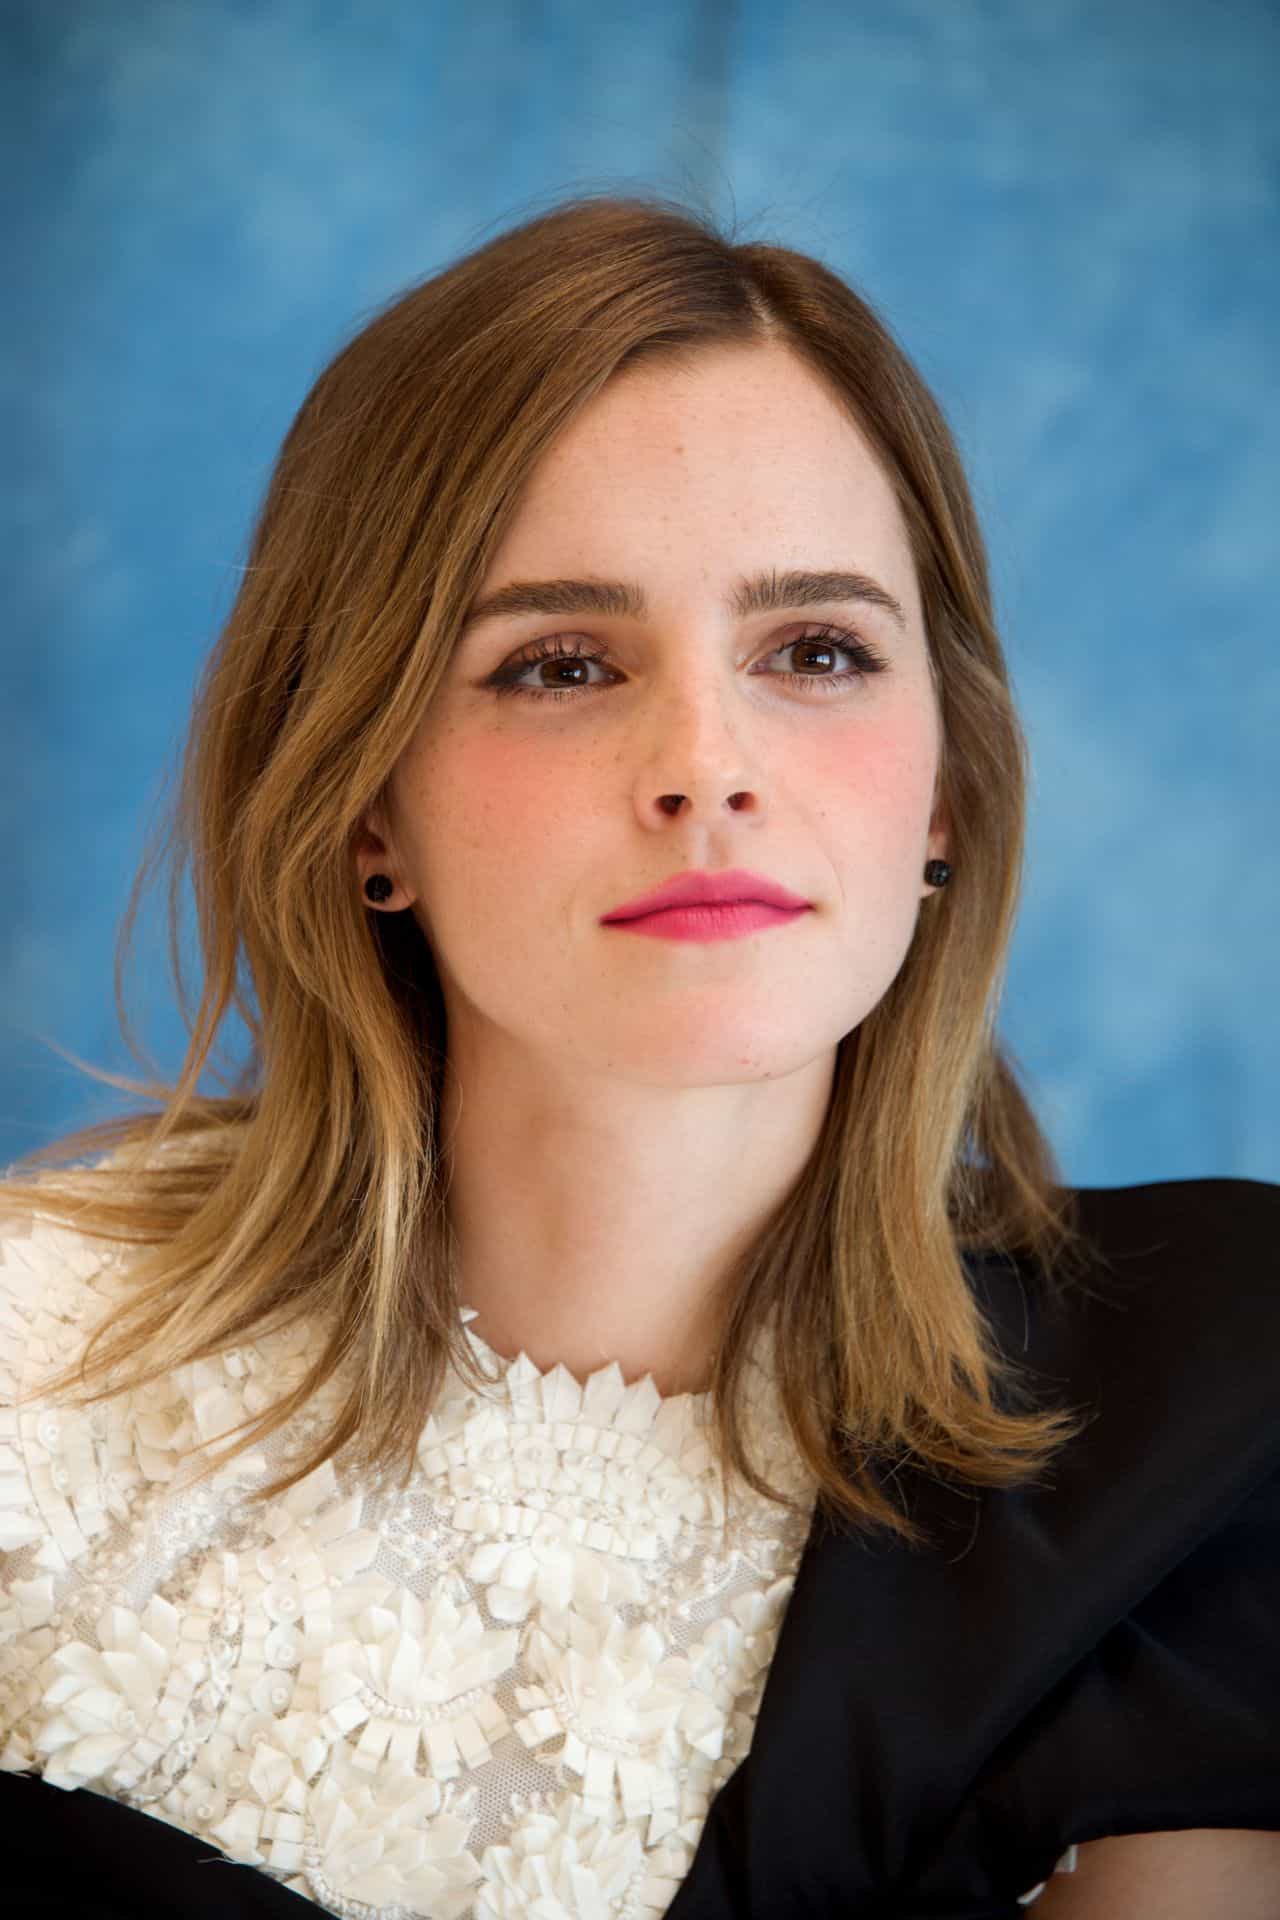 Emma Watson Oozes Beauty at the Press Conference at the Maybourne Hotel